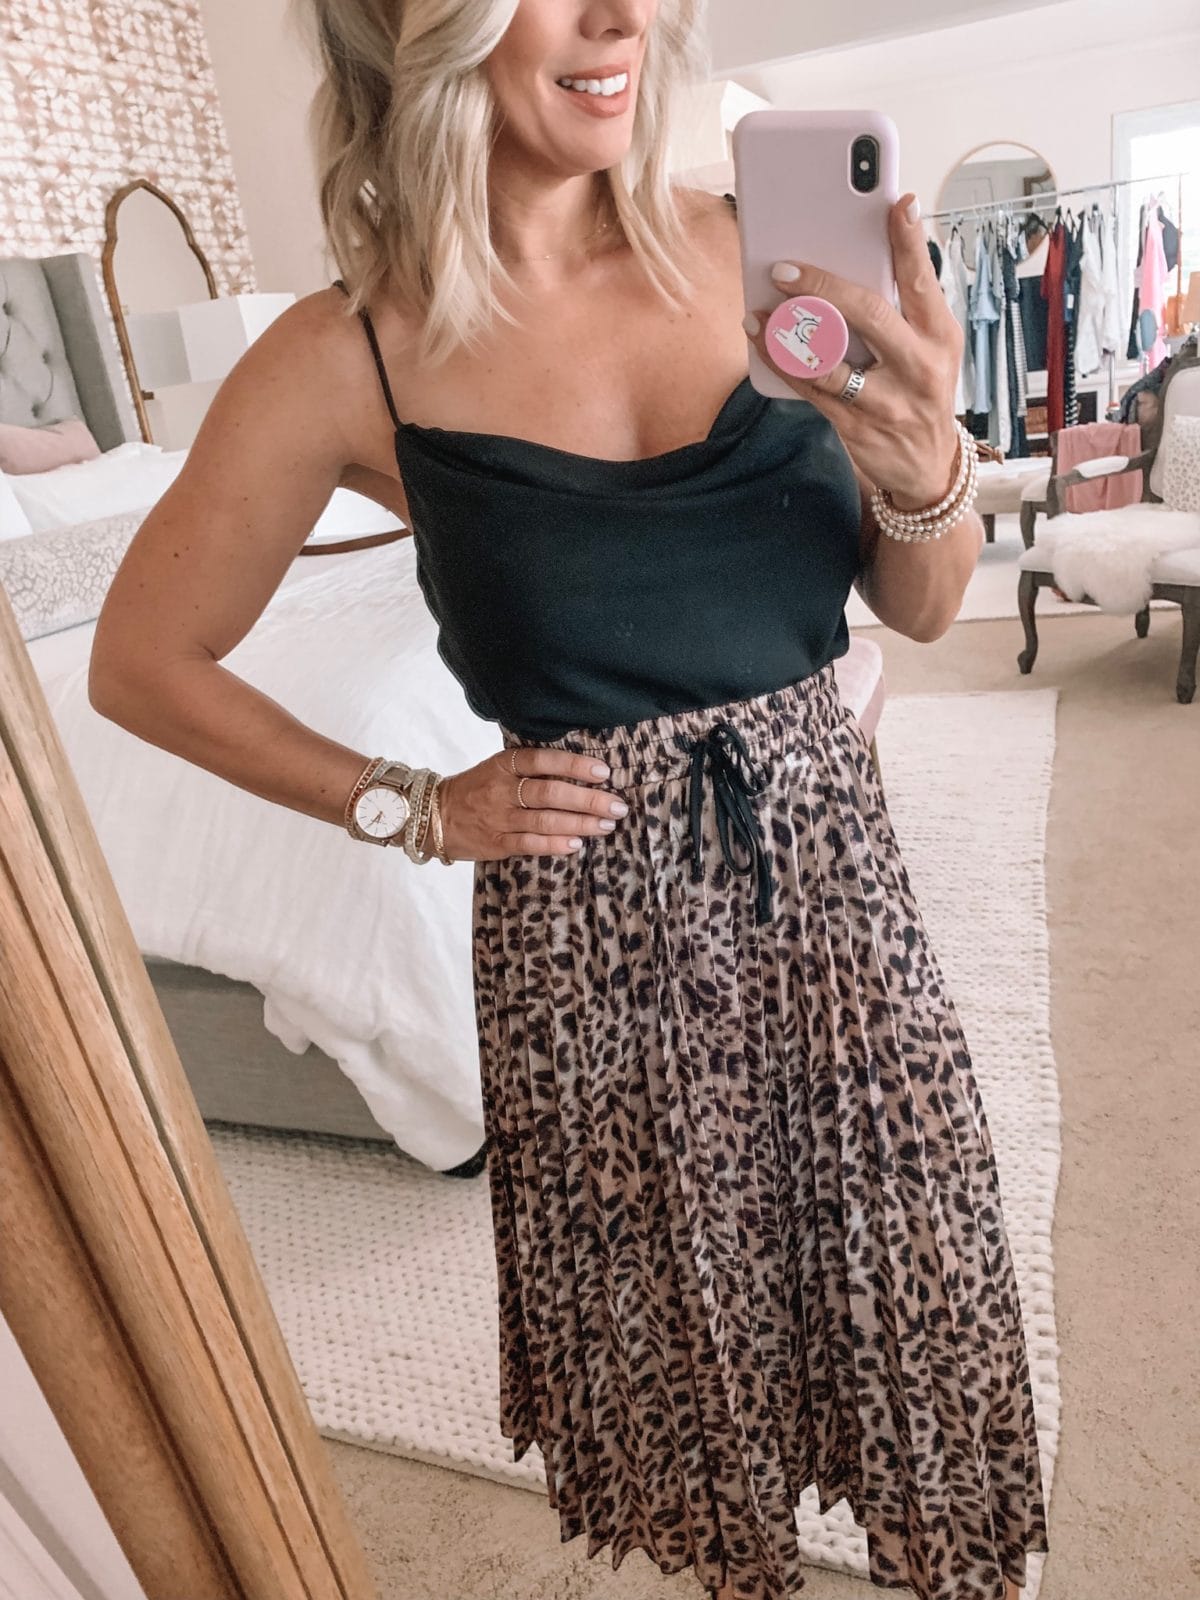 Amazon Fashion Haul - Cowl Neck Top with a Maxi Leopard Skirt